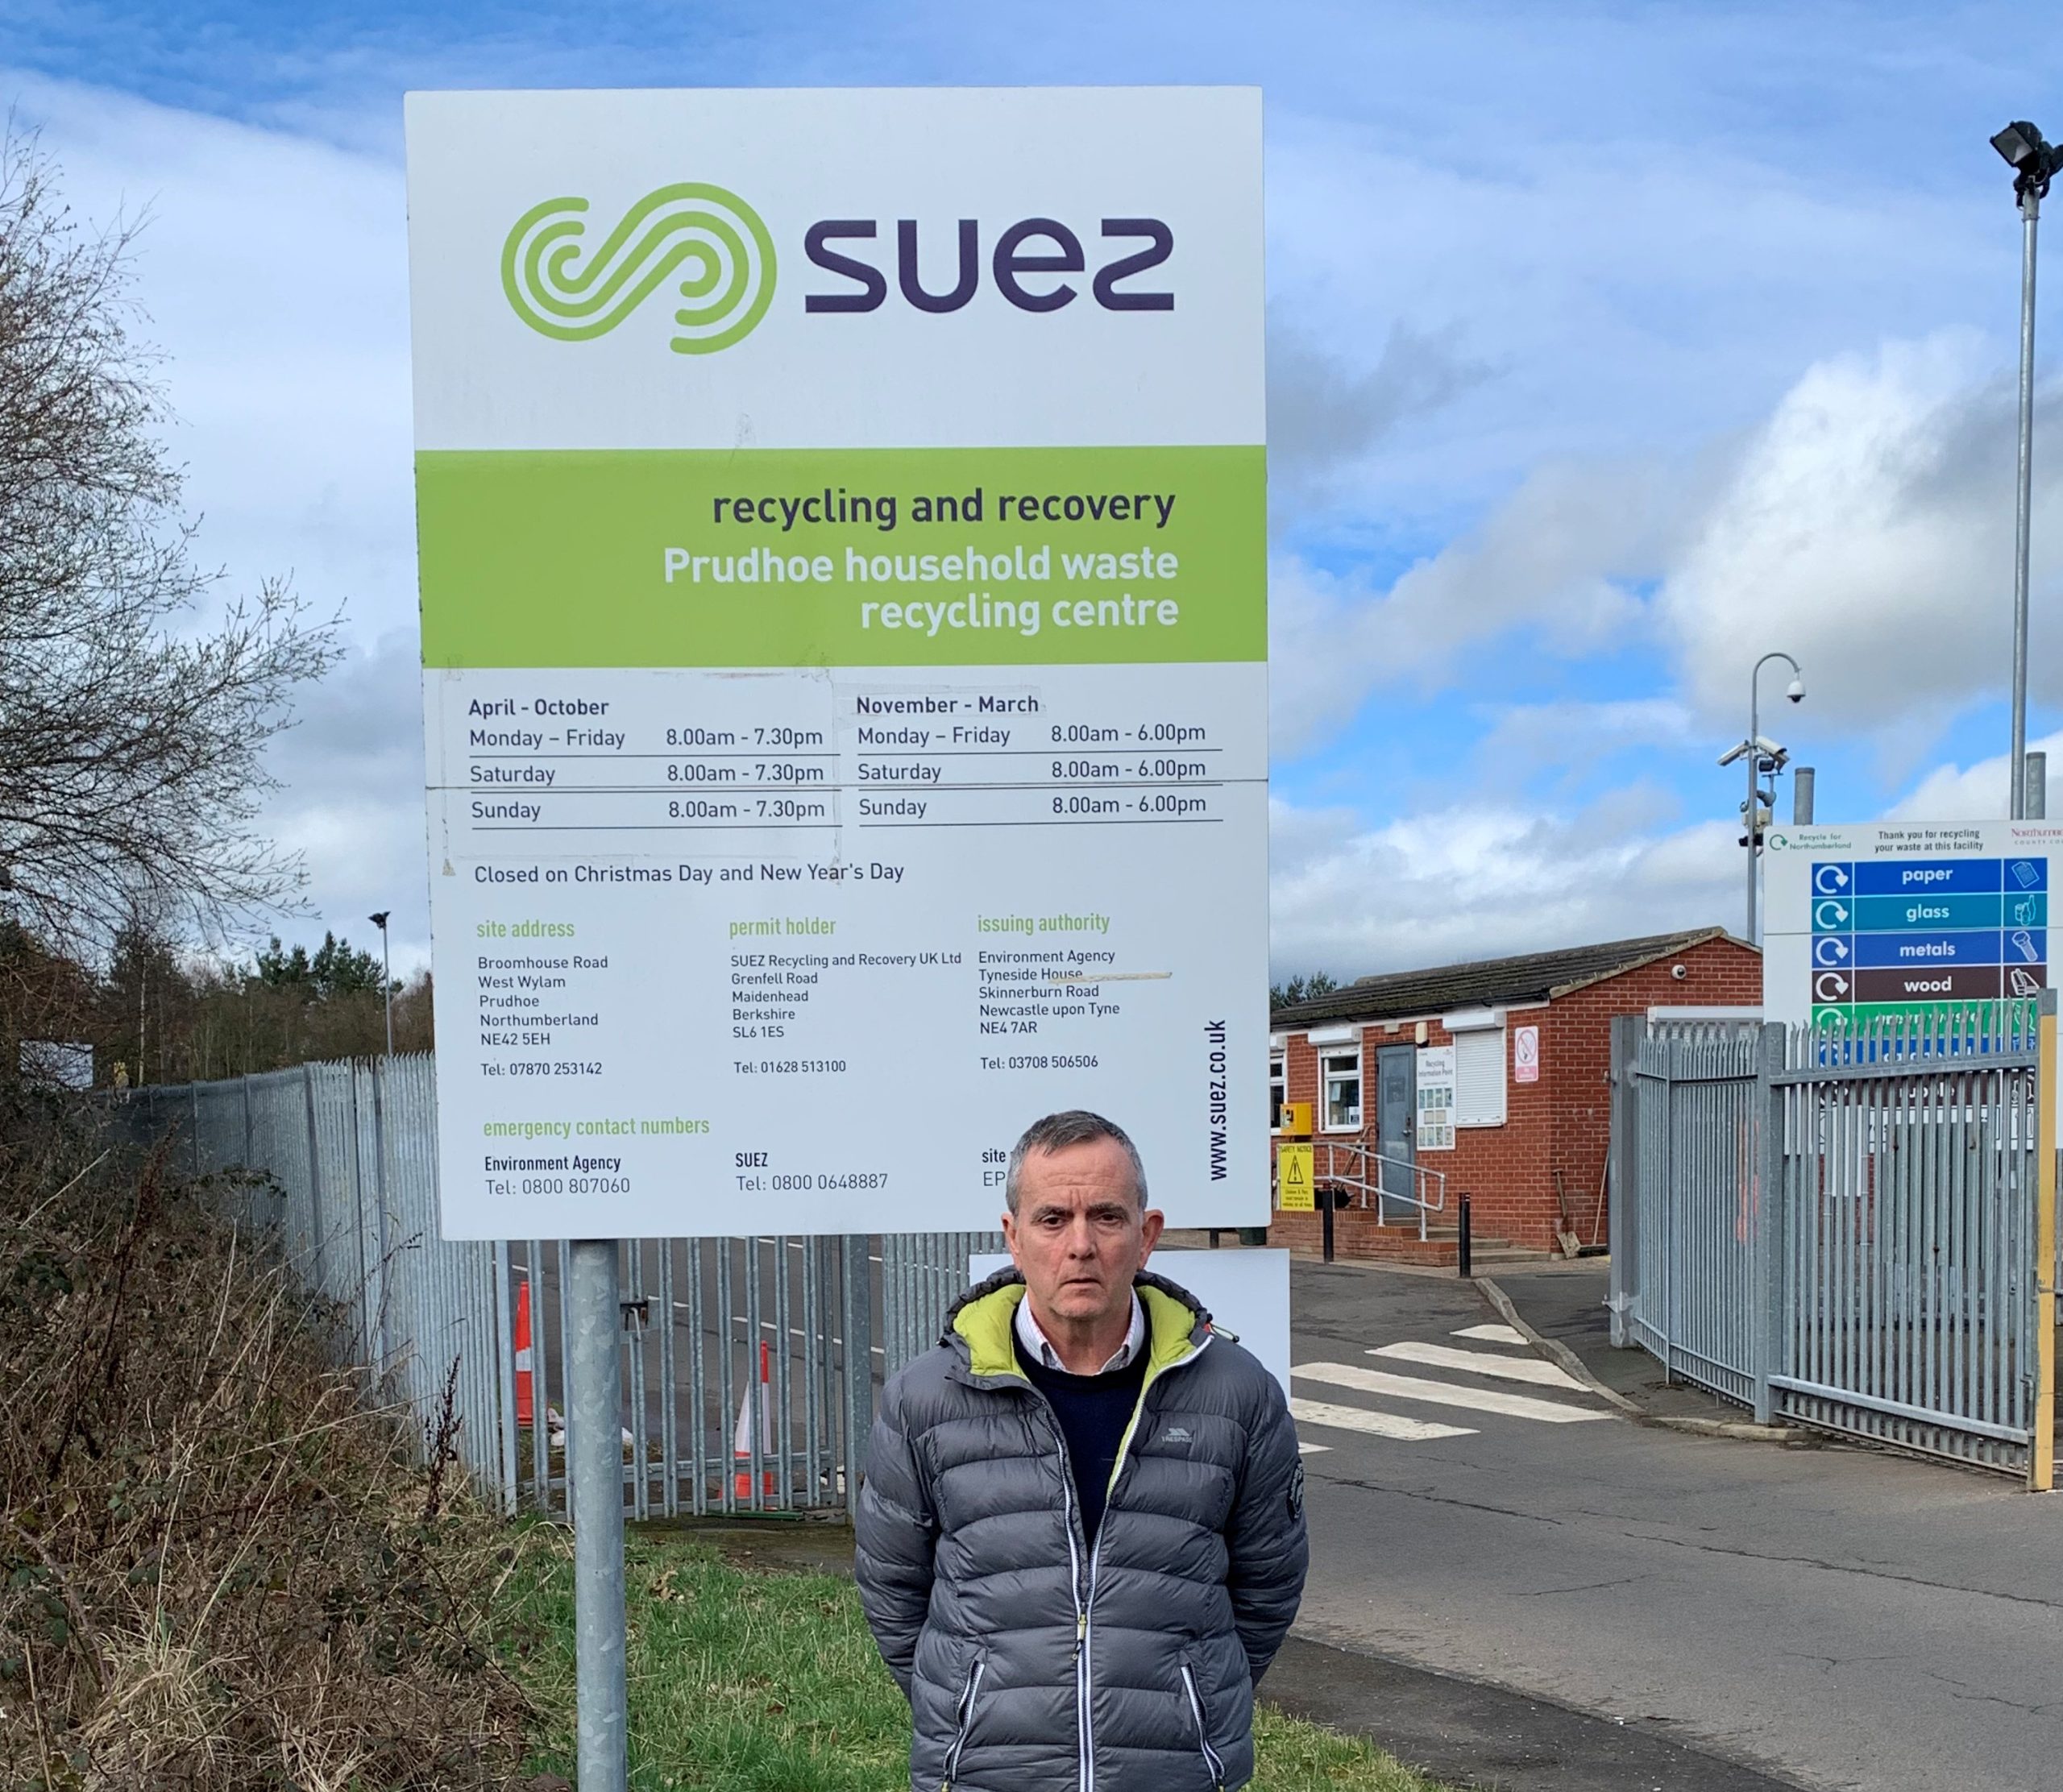 Reduced Hours at Prudhoe Recycling Centre